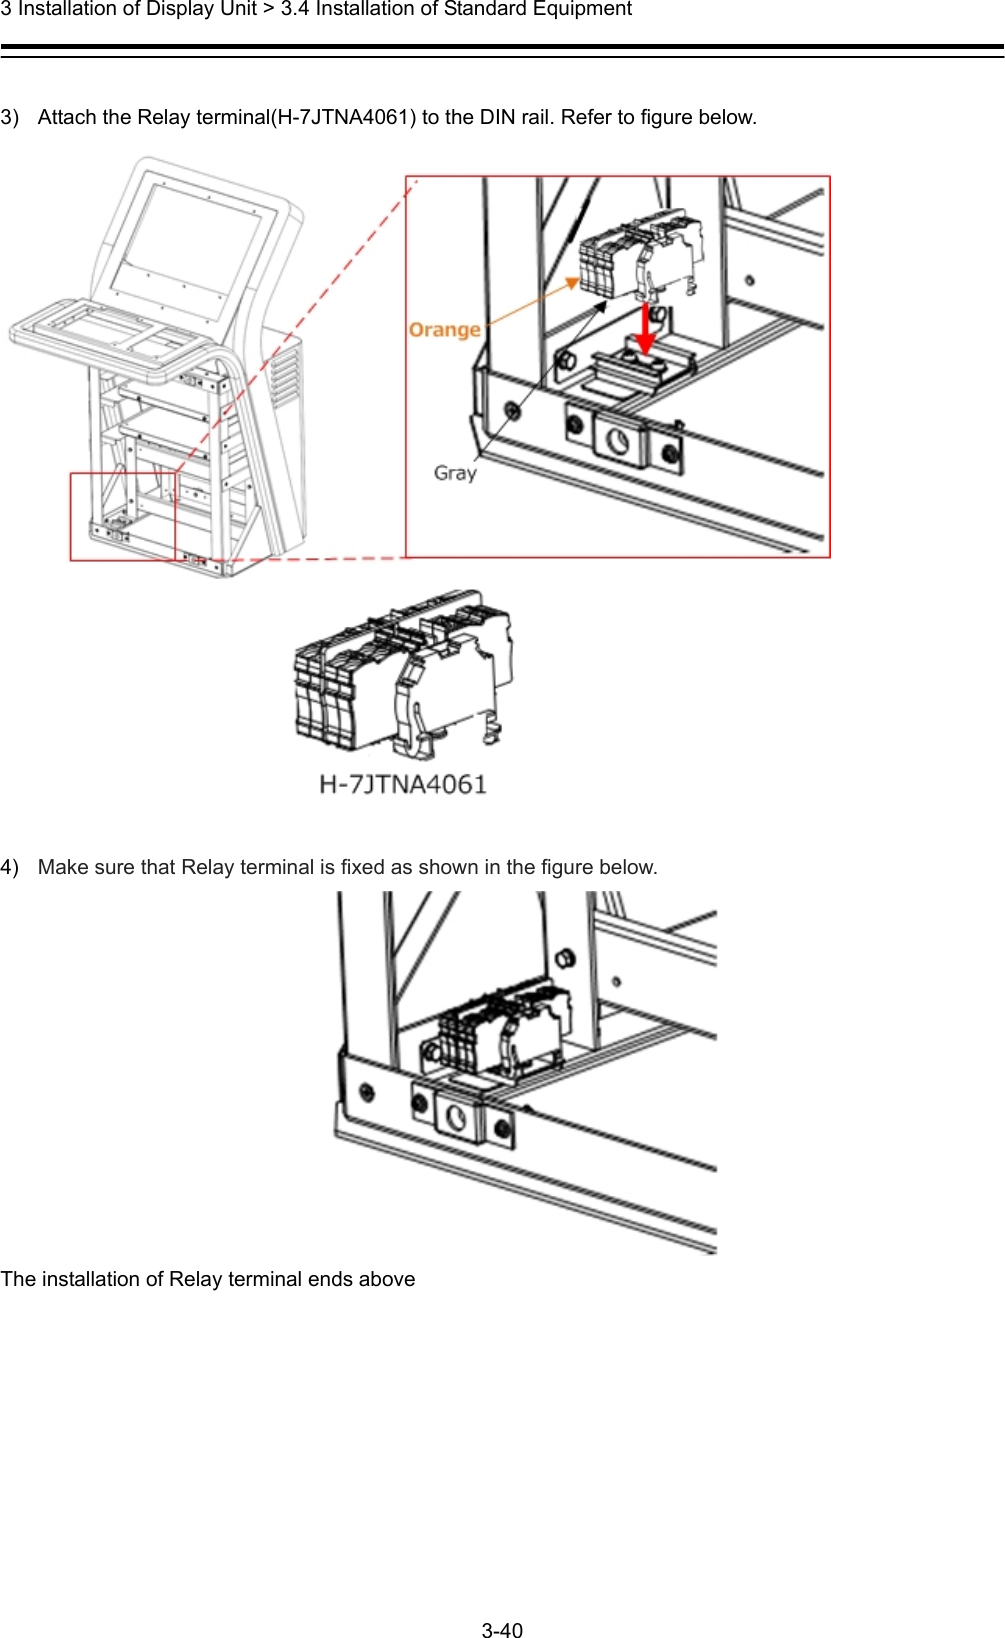  3 Installation of Display Unit &gt; 3.4 Installation of Standard Equipment 3-40   3)  Attach the Relay terminal(H-7JTNA4061) to the DIN rail. Refer to figure below.   4)  Make sure that Relay terminal is fixed as shown in the figure below.  The installation of Relay terminal ends above  